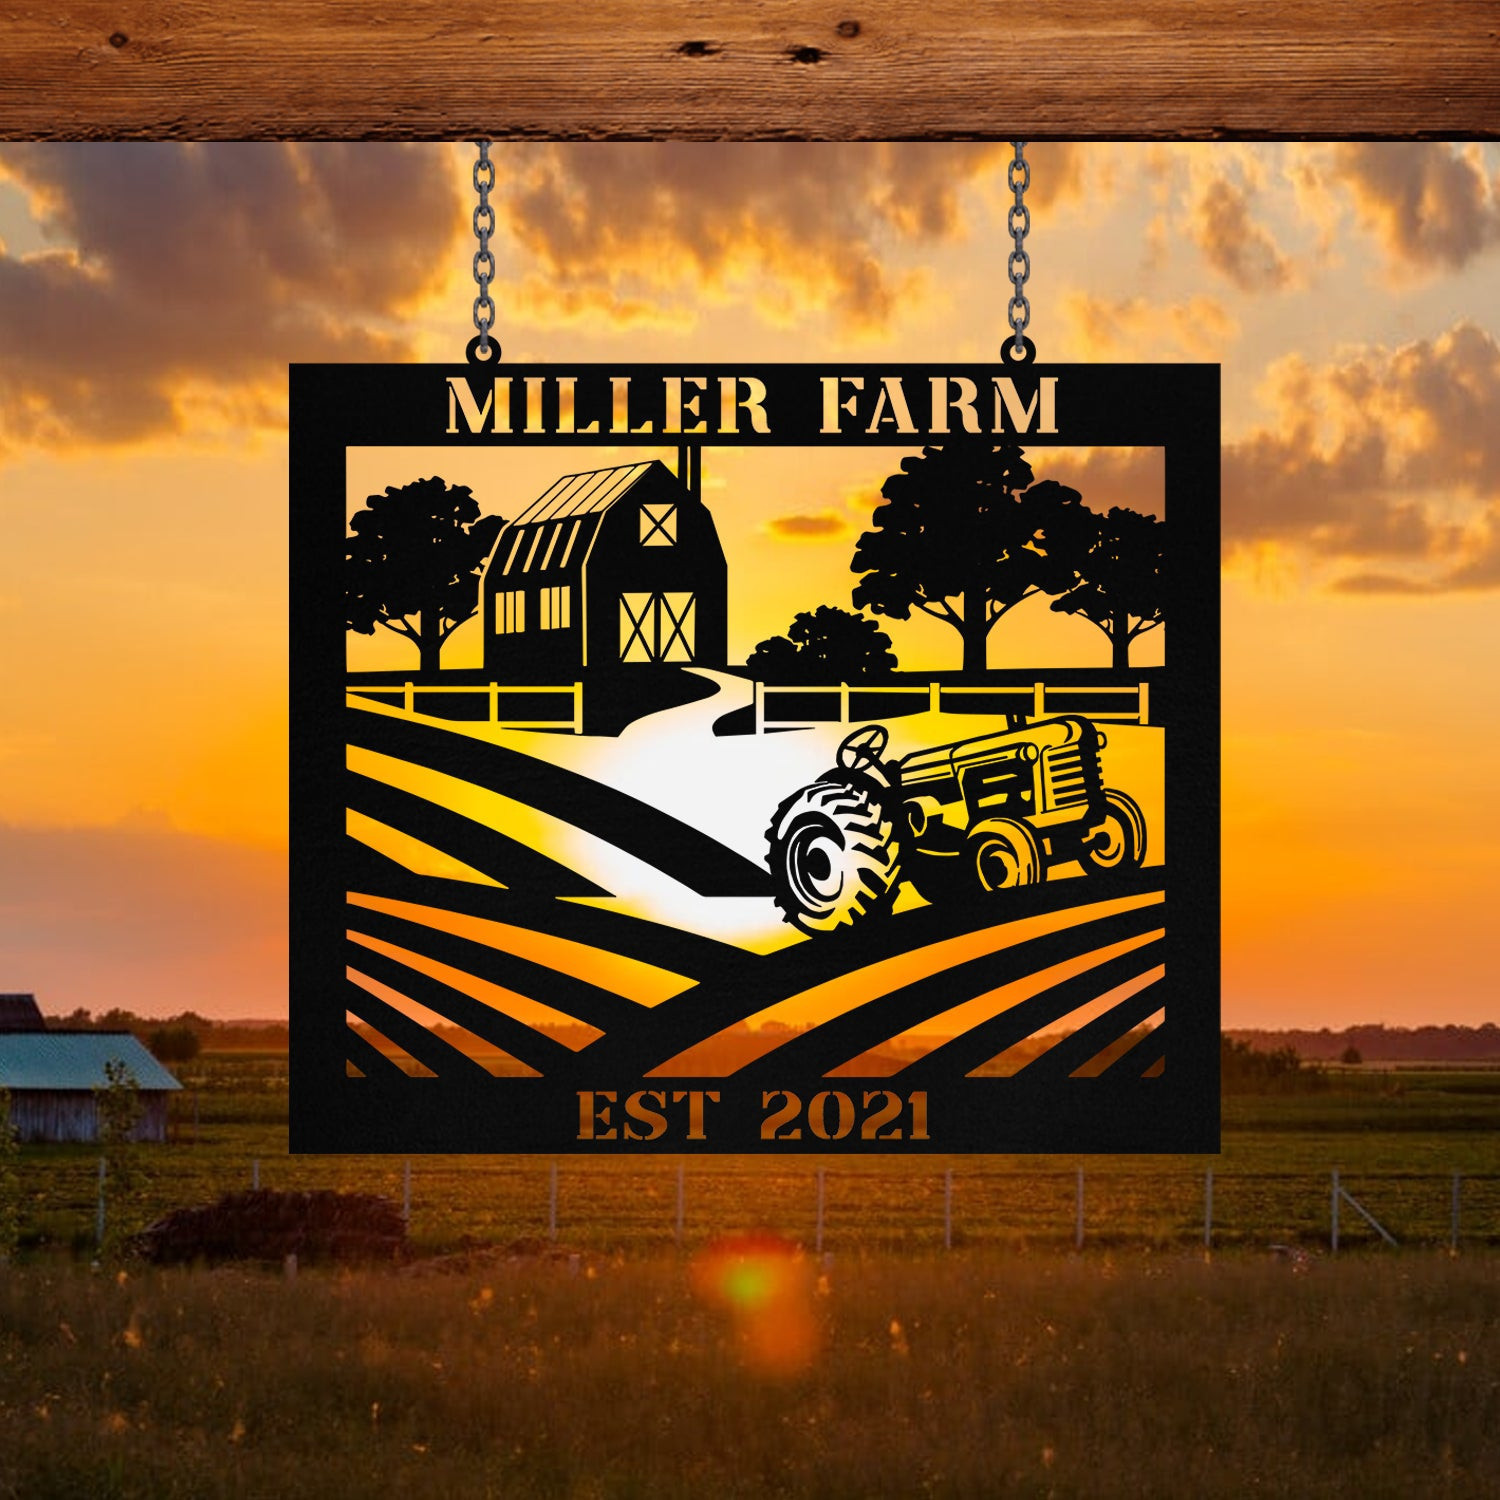 Personalized Metal Farm Sign Barn Tractor Monogram, Custom Outdoor, Front Gate, Metal Laser Cut Metal Signs Custom Gift Ideas 12x12IN